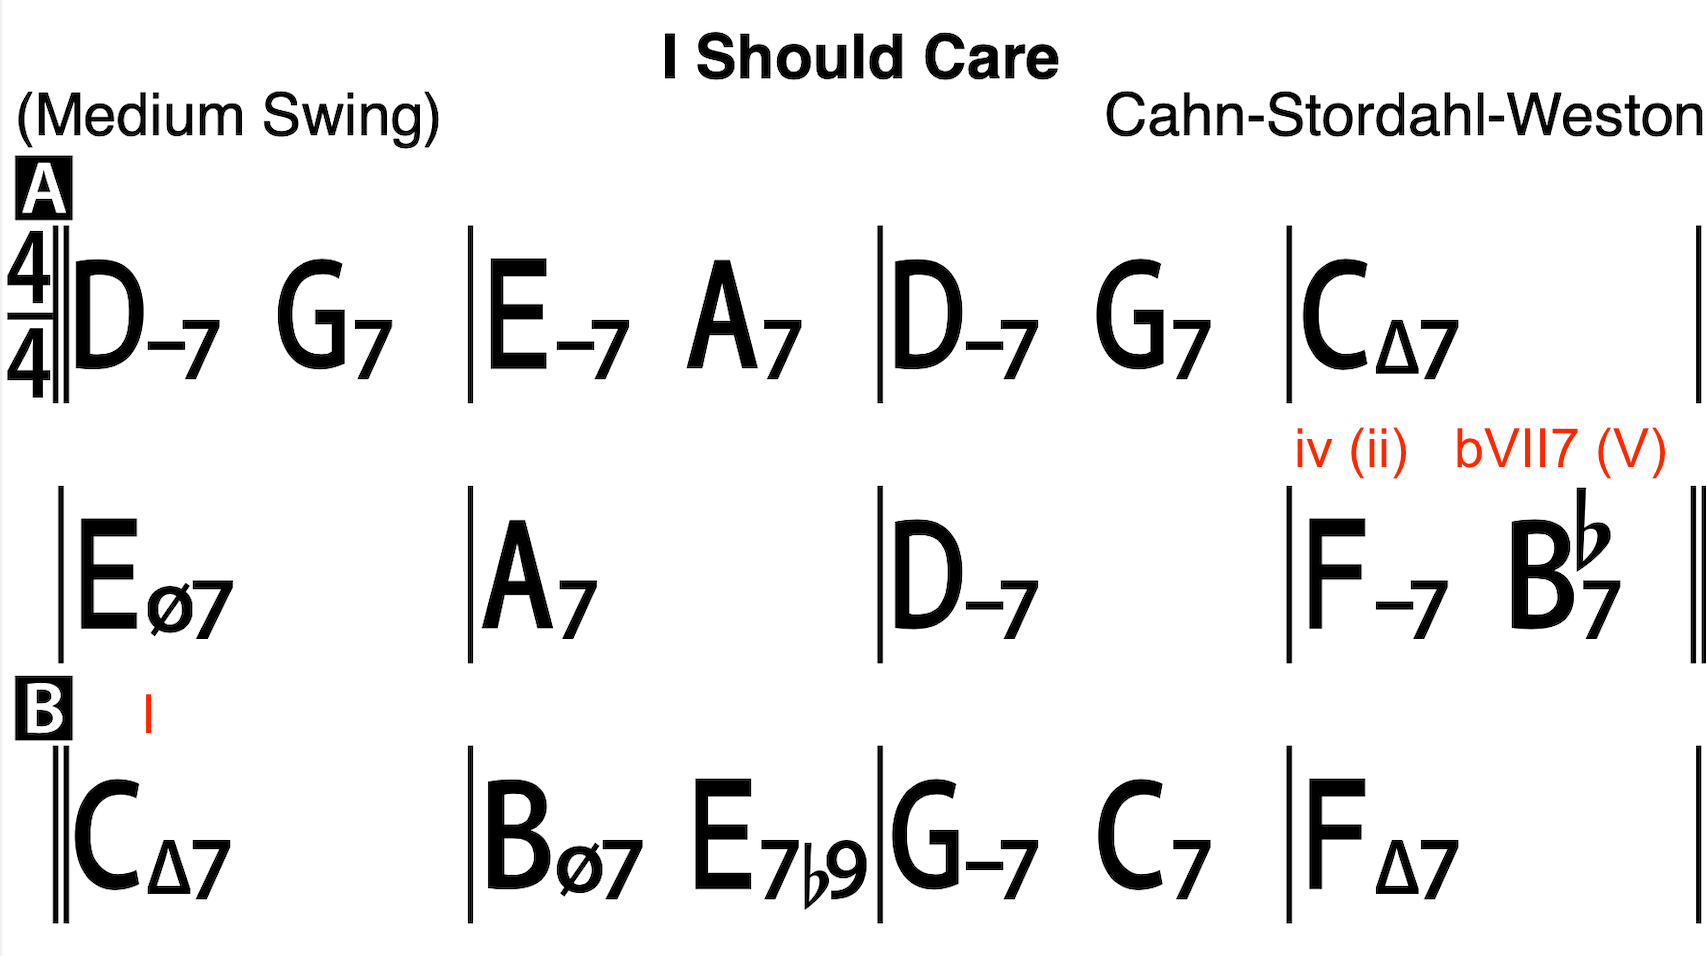 Chord chart for I Should Care